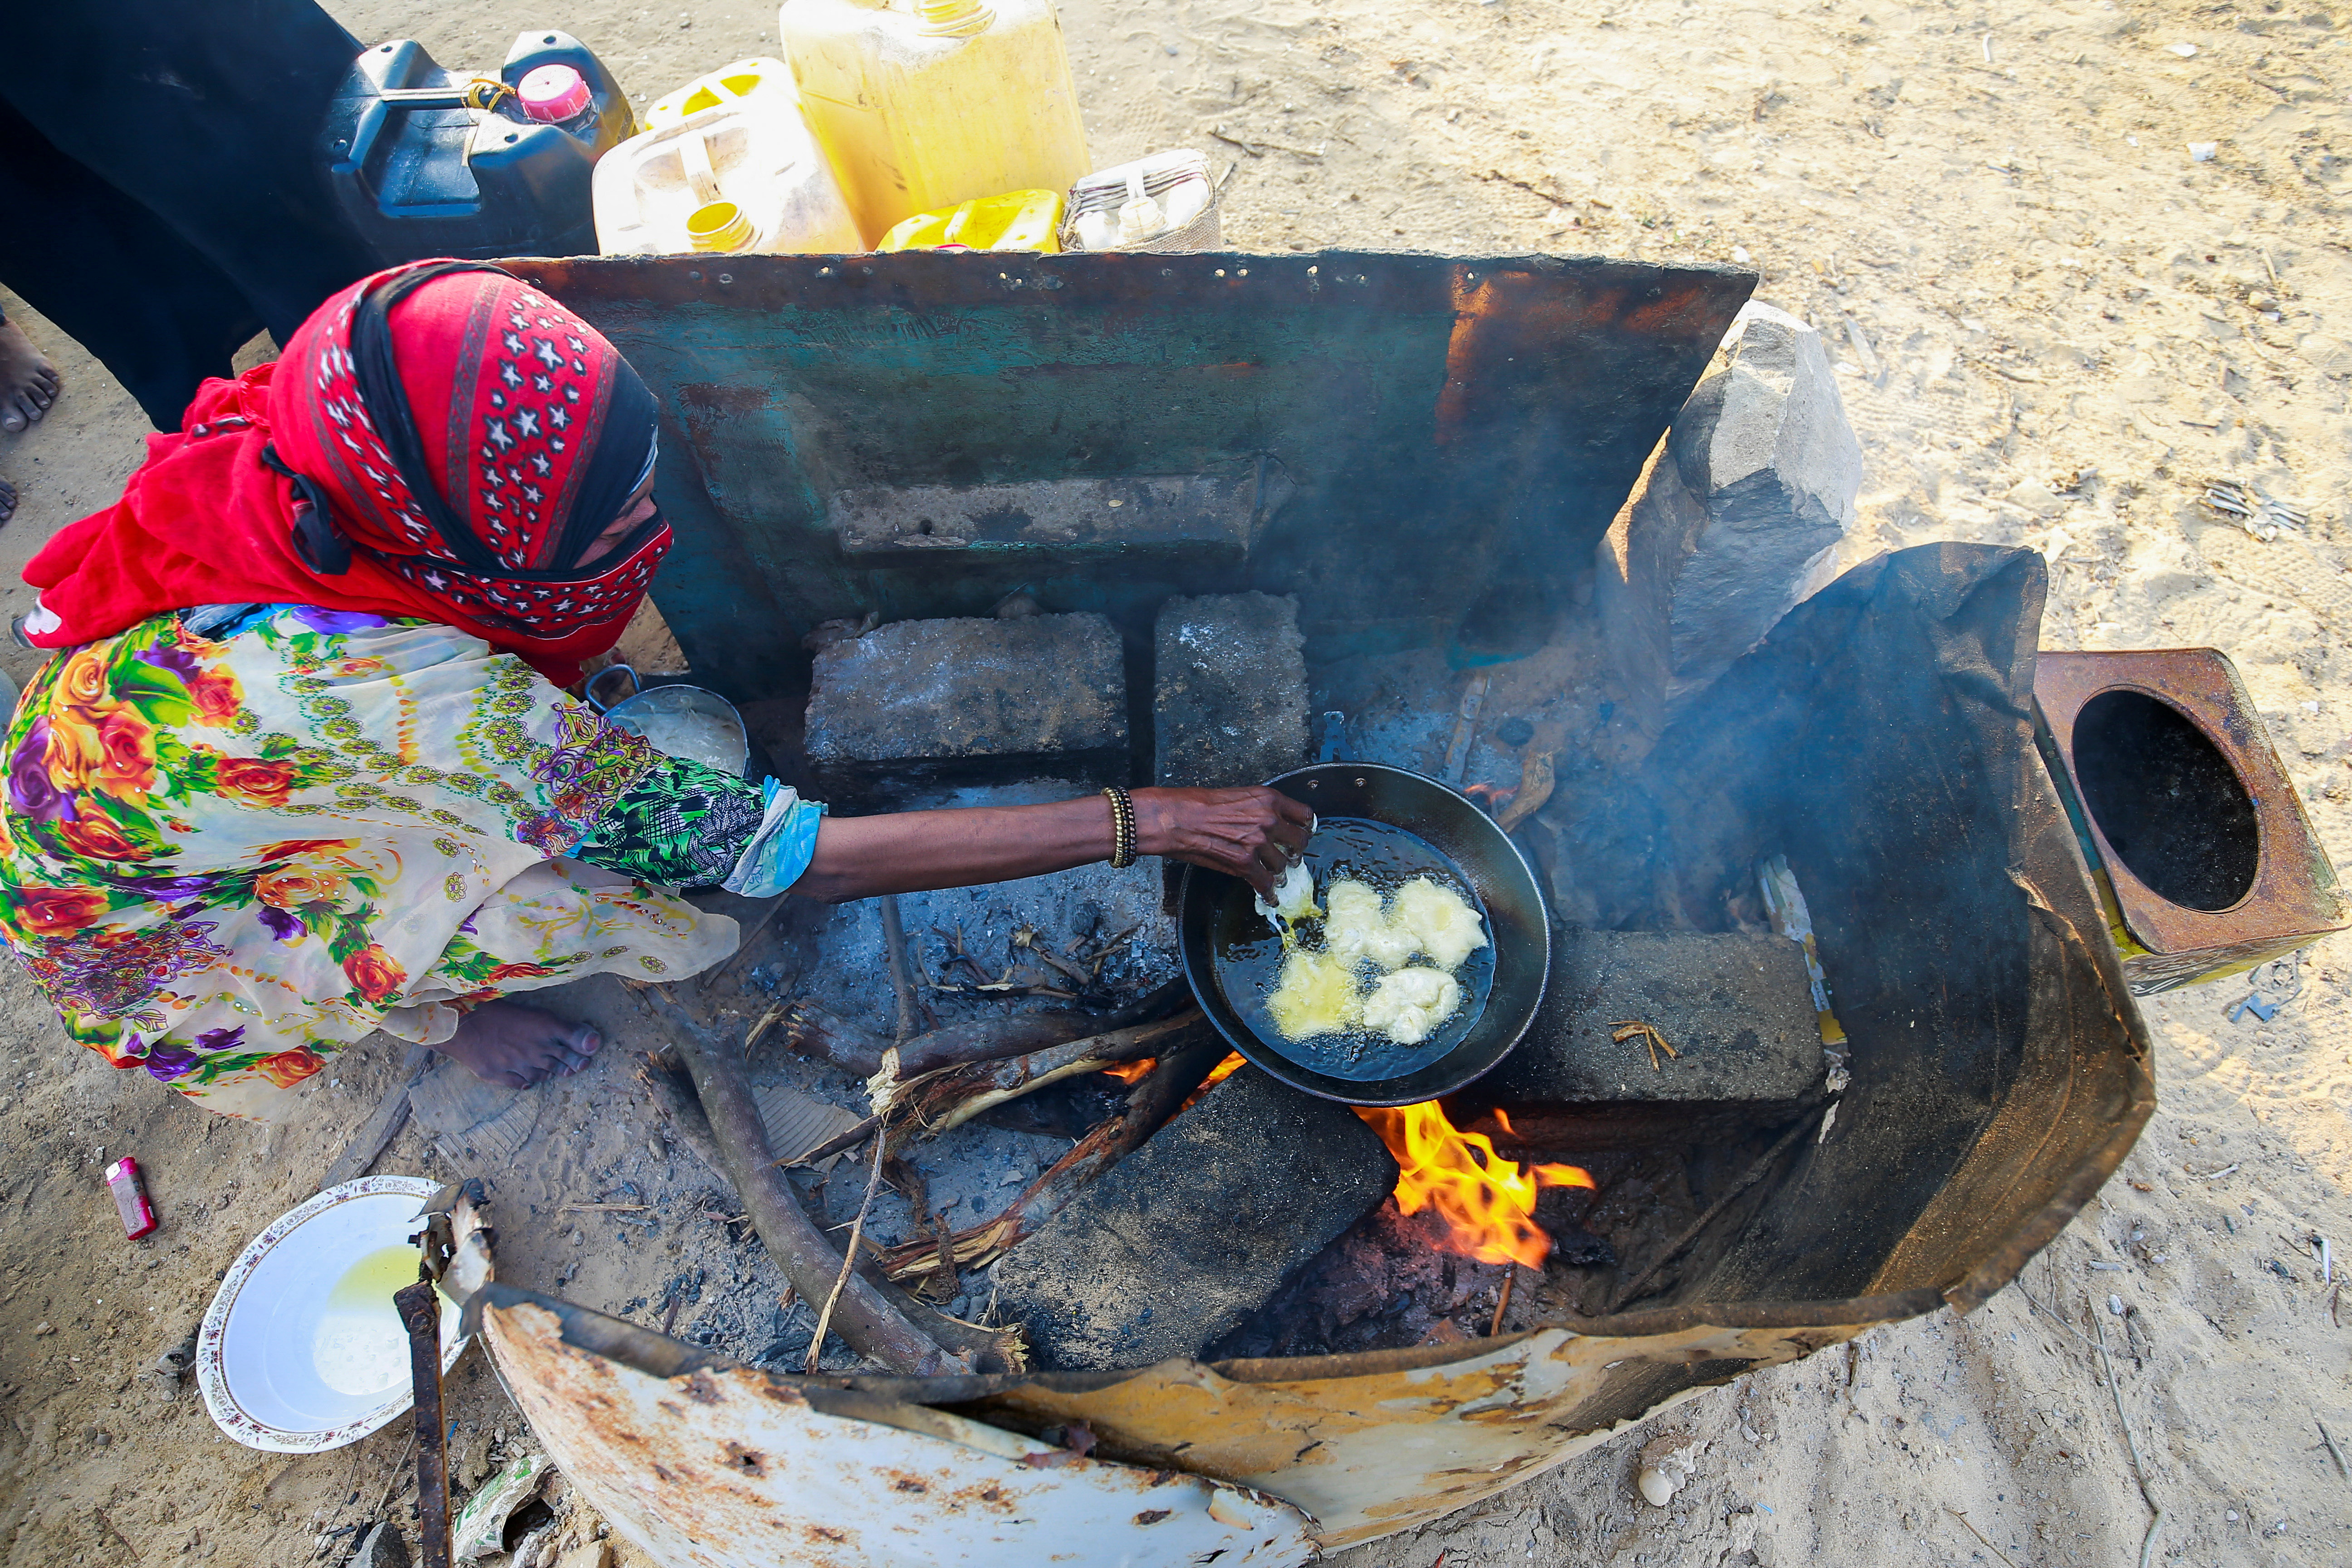 Woman cooks a meal at a camp for displaced people in al-Ghaidha